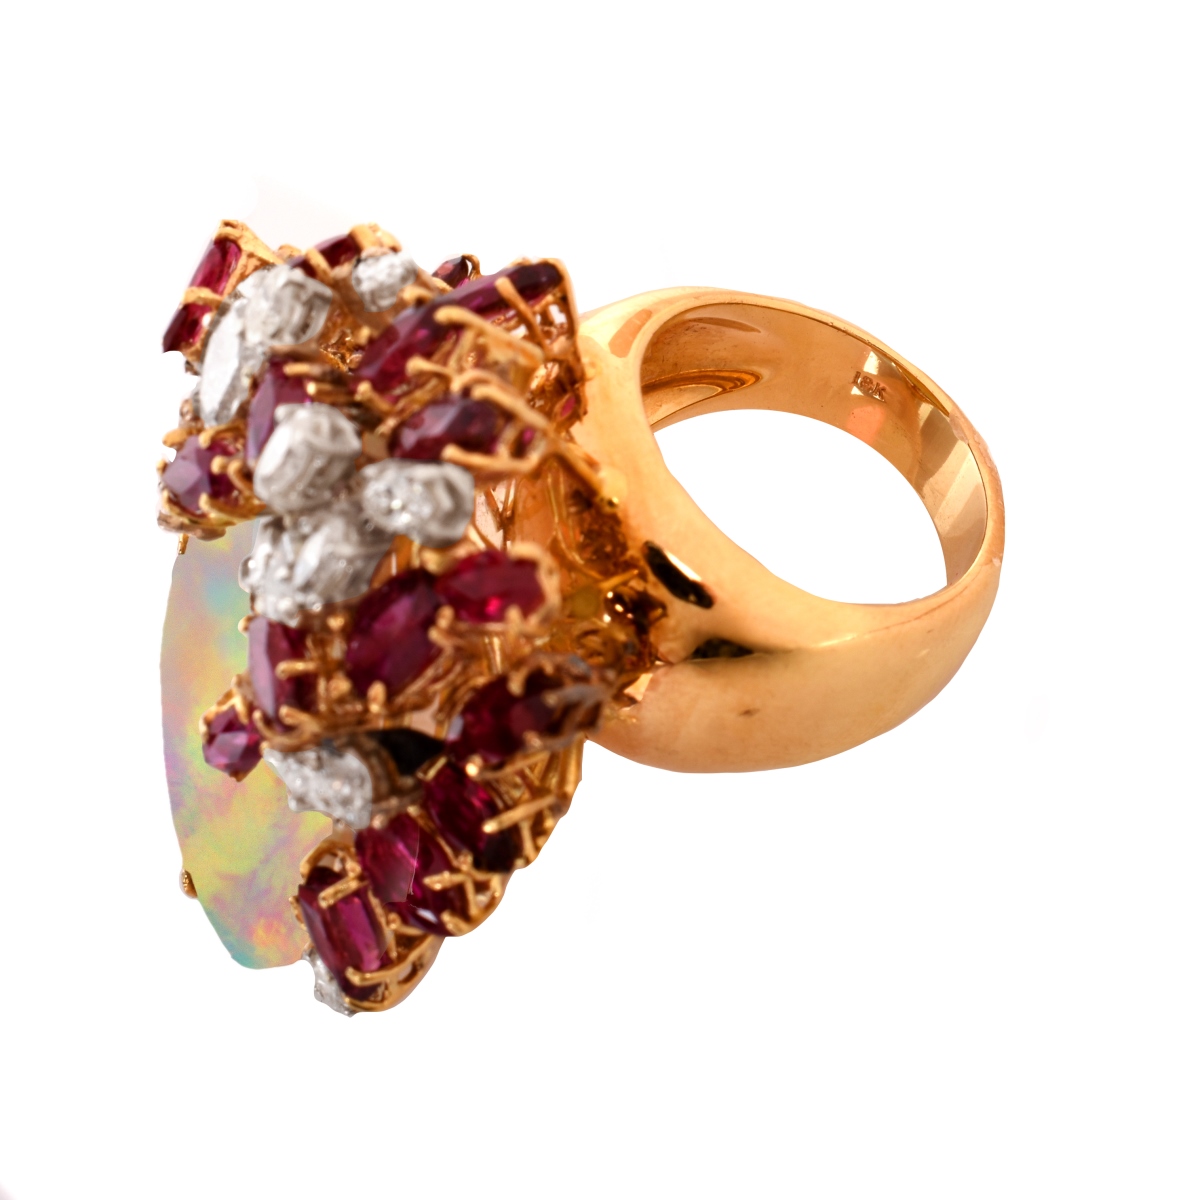 Vintage Opal, Ruby, Diamond and 18K Ring